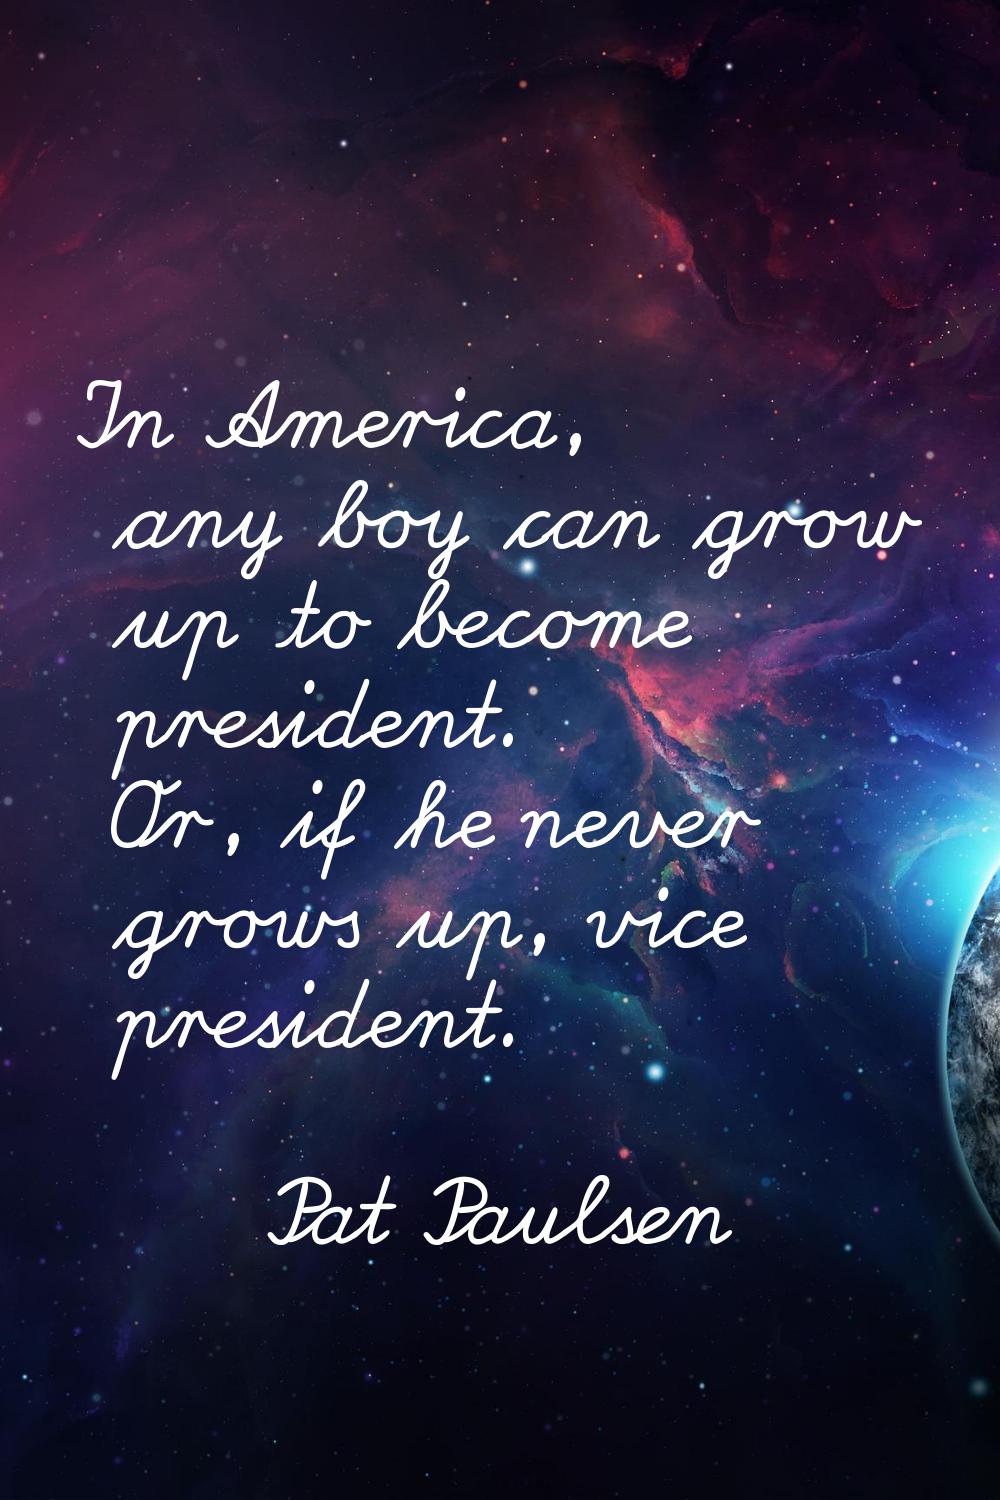 In America, any boy can grow up to become president. Or, if he never grows up, vice president.